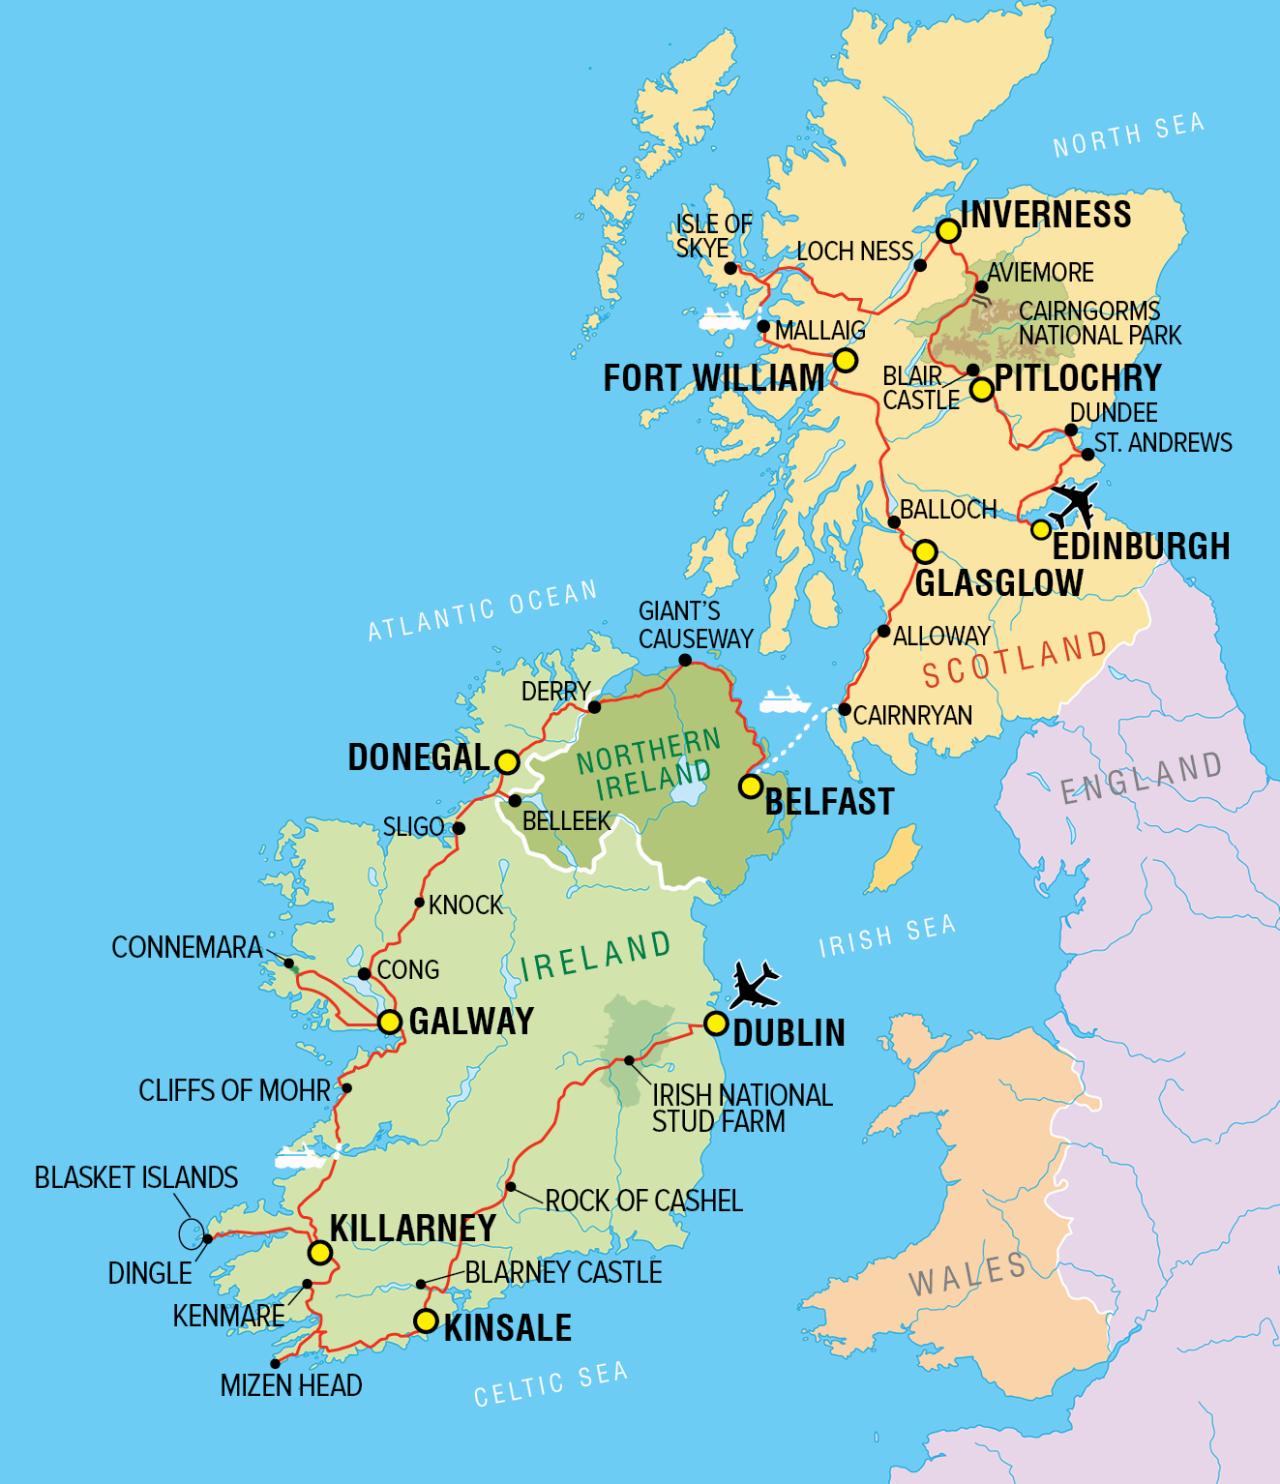 tours in ireland scotland and england